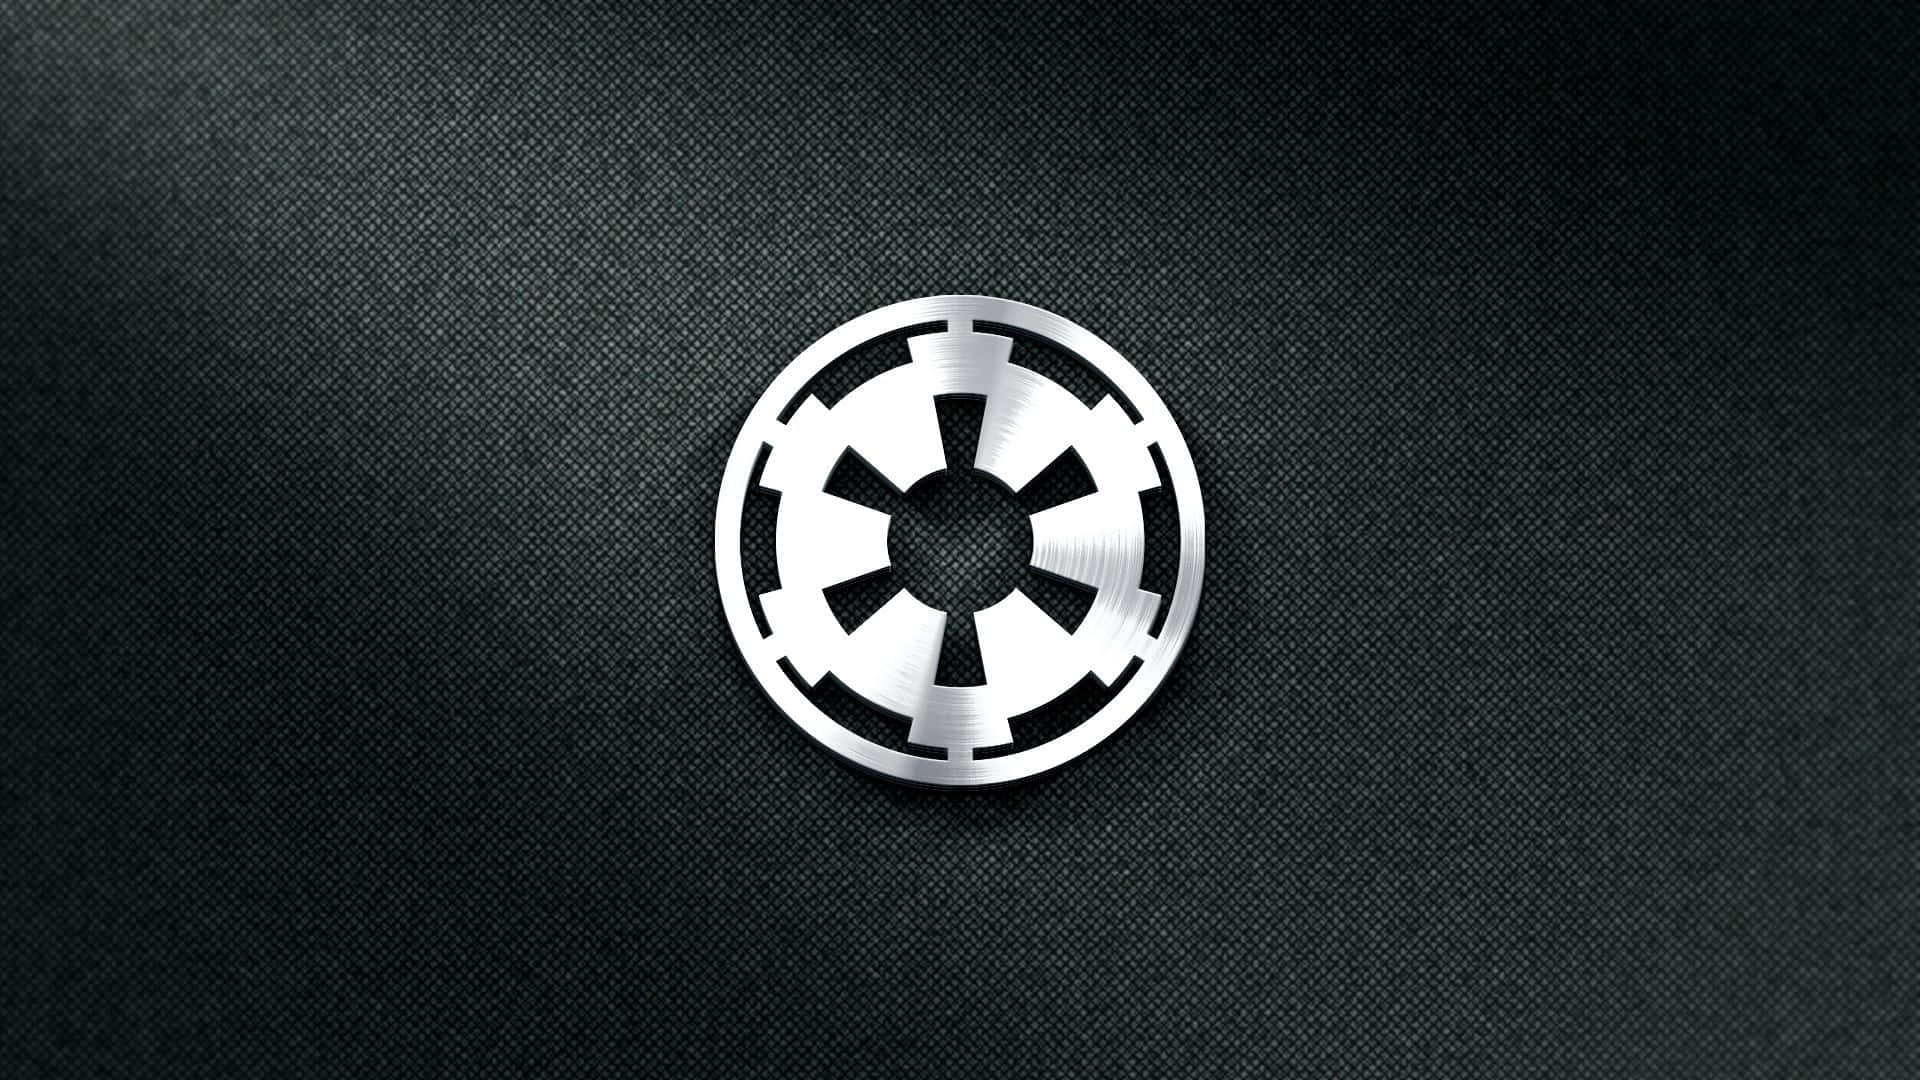 The Official Logo of the Galactic Empire from the Original Star Wars Trilogy Wallpaper